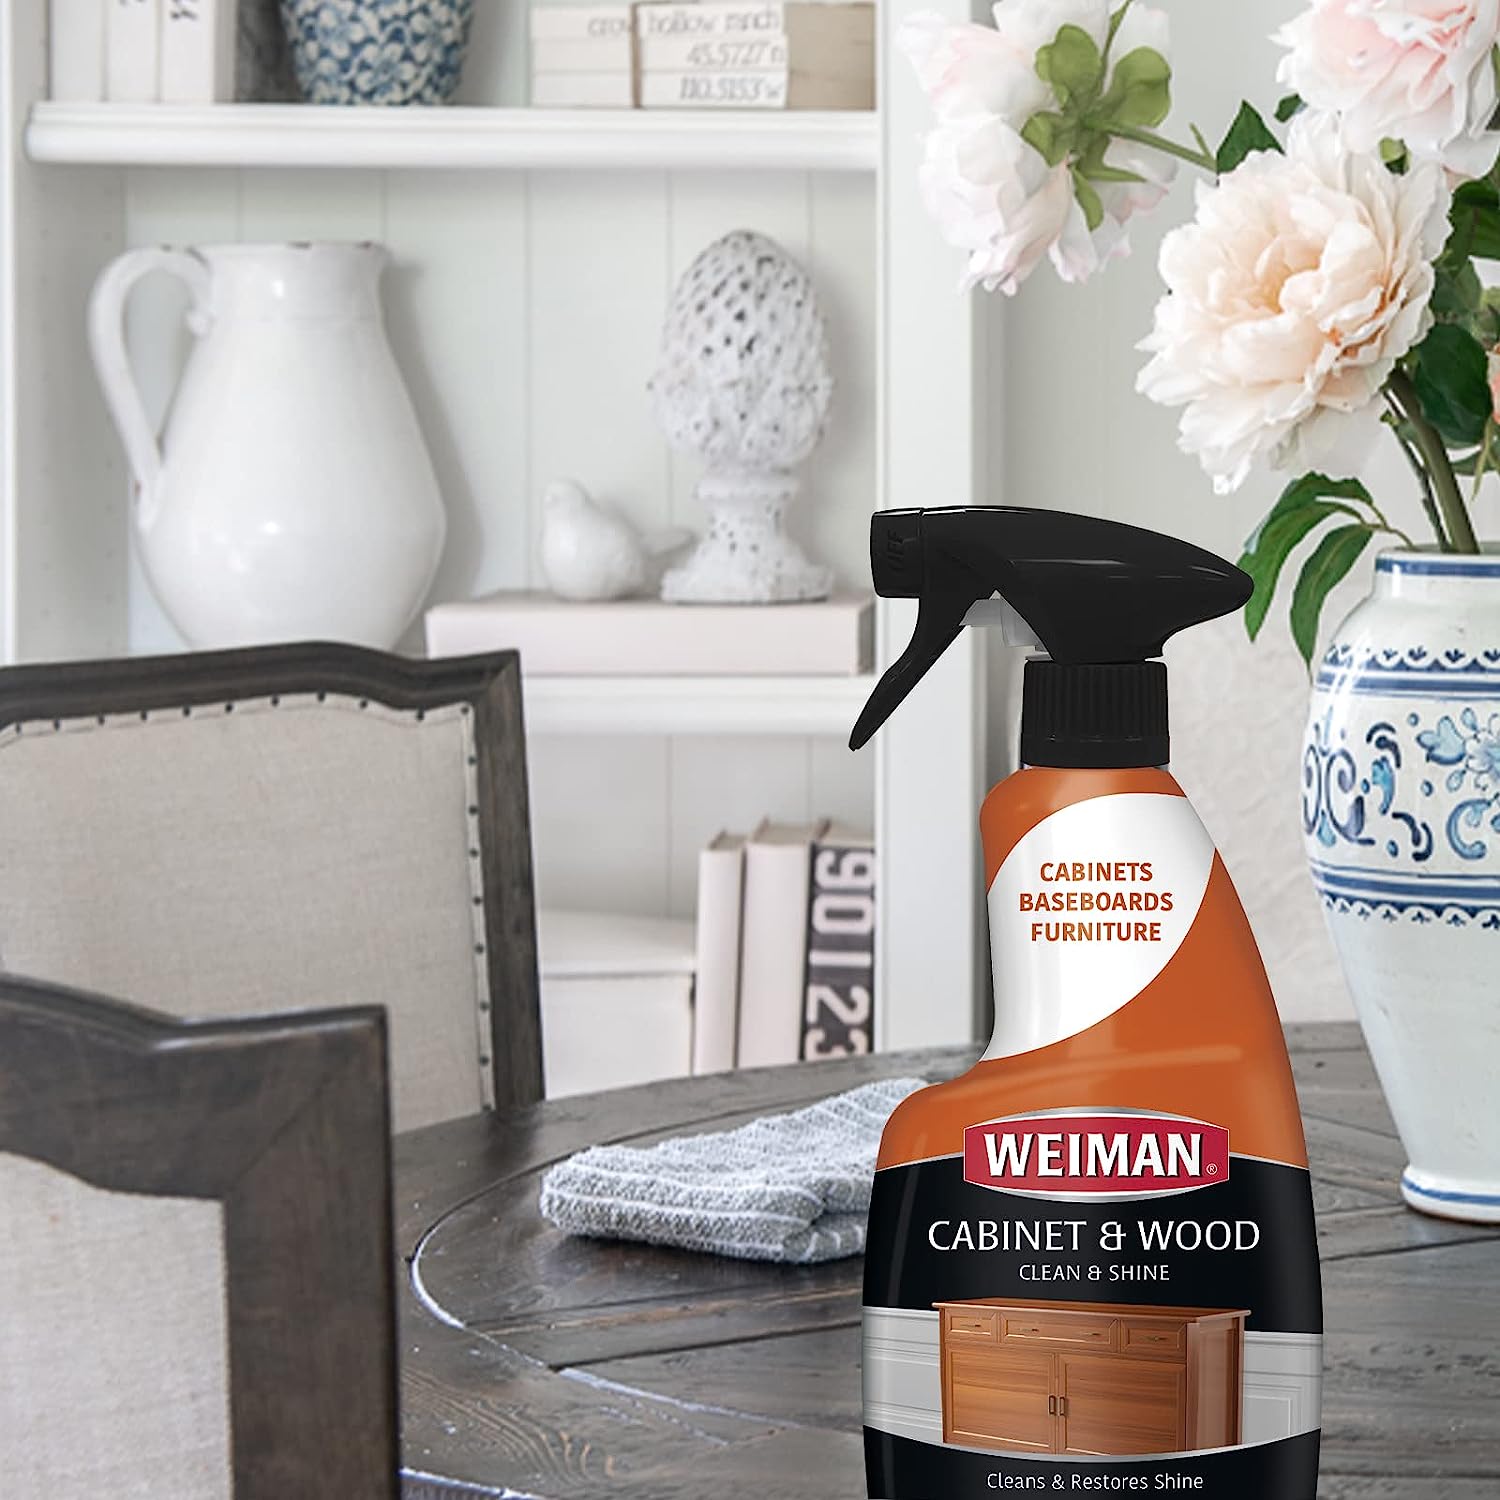 Weiman Cabinet & Wood Clean & Shine Clean and Protect Spray - For Wood Cabinets, Furniture, Tables, Baseboards, Trim and more! 16 oz, 2 PACK w/MicroFiber Towel : Health & Household